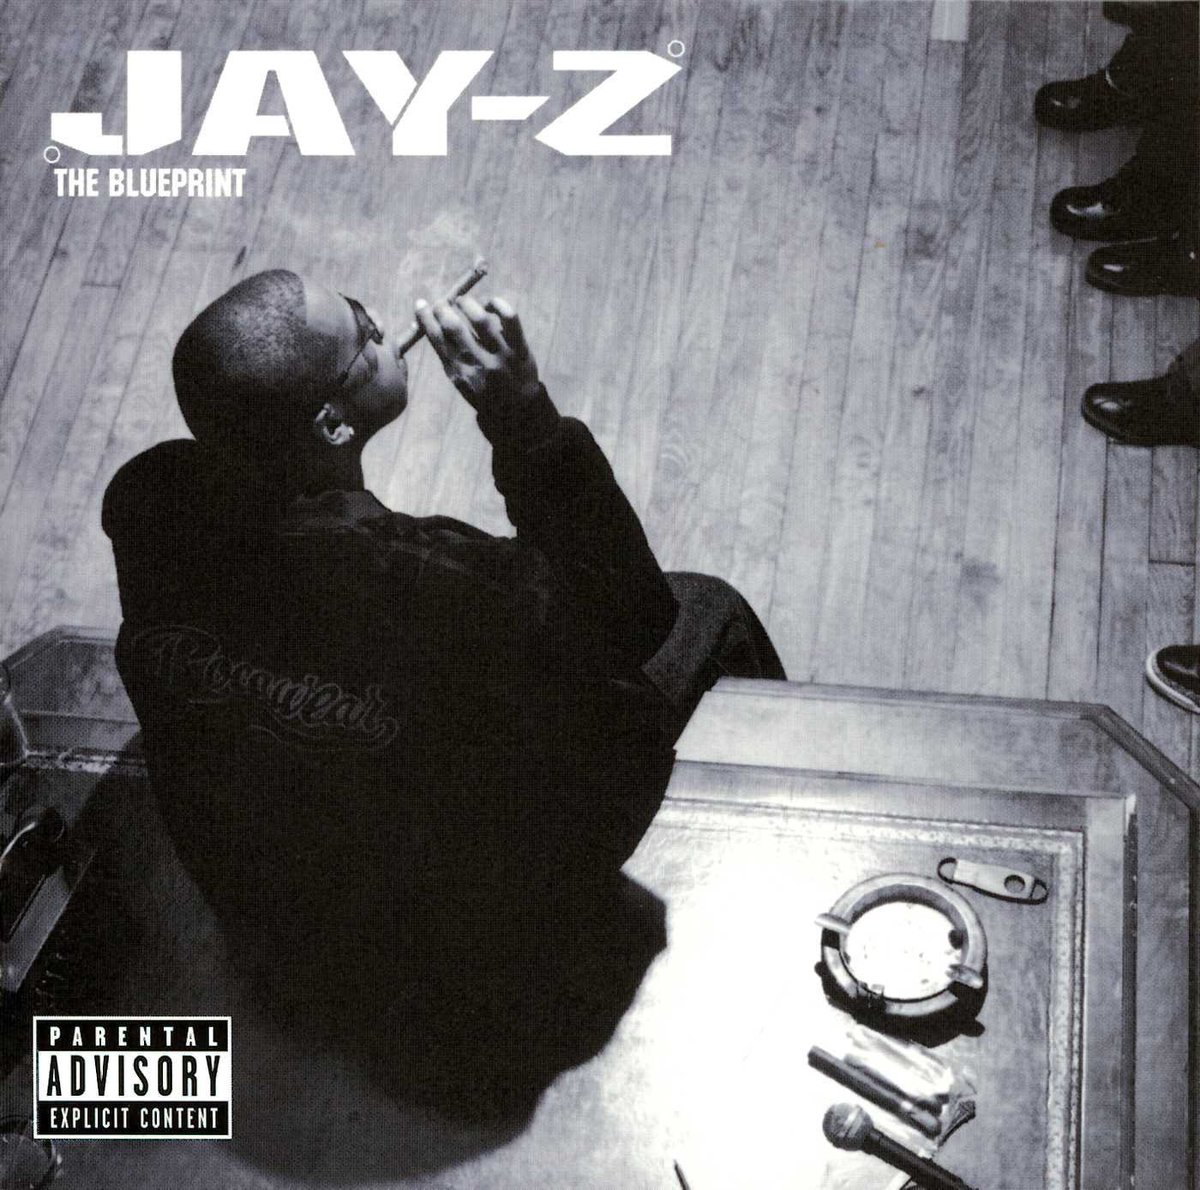 20001-The BlueprintProbably my favourite Jay-Z album! Coming with the swagger of a veteran, witty braggadocio and brilliant bars, he made a truly special album here. That and the emphatic production which introduced the world to Kanye West, makes this a true staple of HH10/10